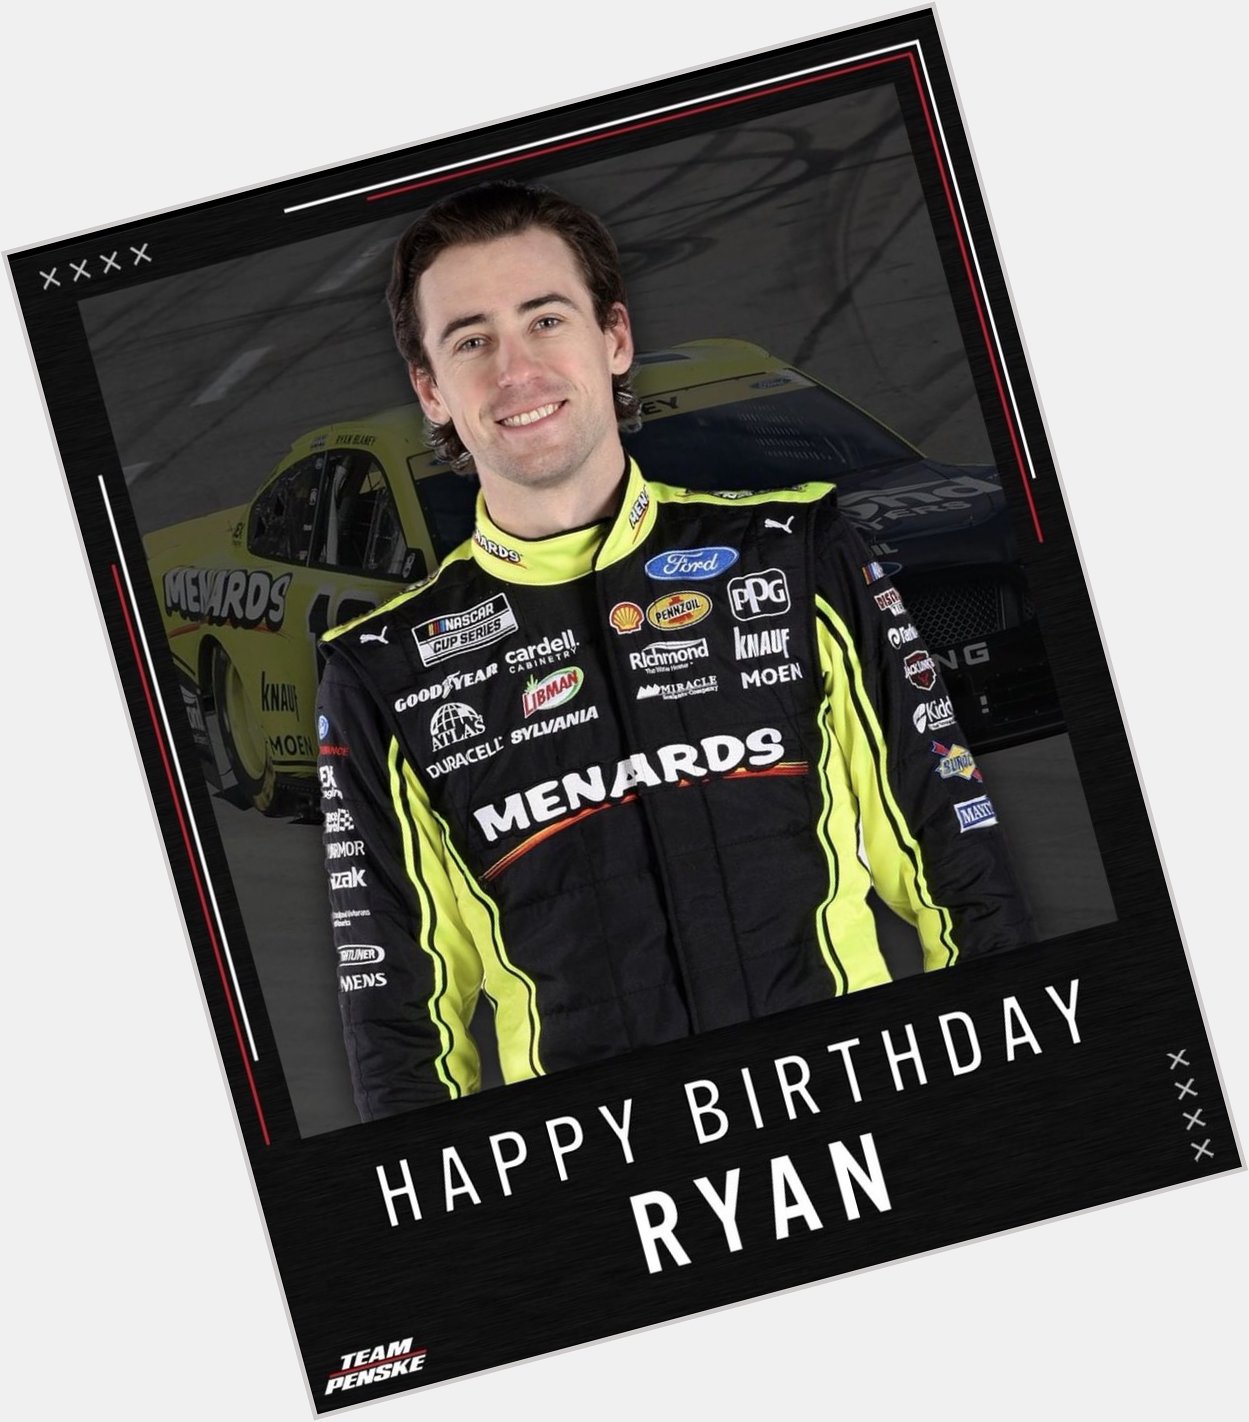 What do you know? I have the same birthday as Ryan Blaney! Happy Birthday, 